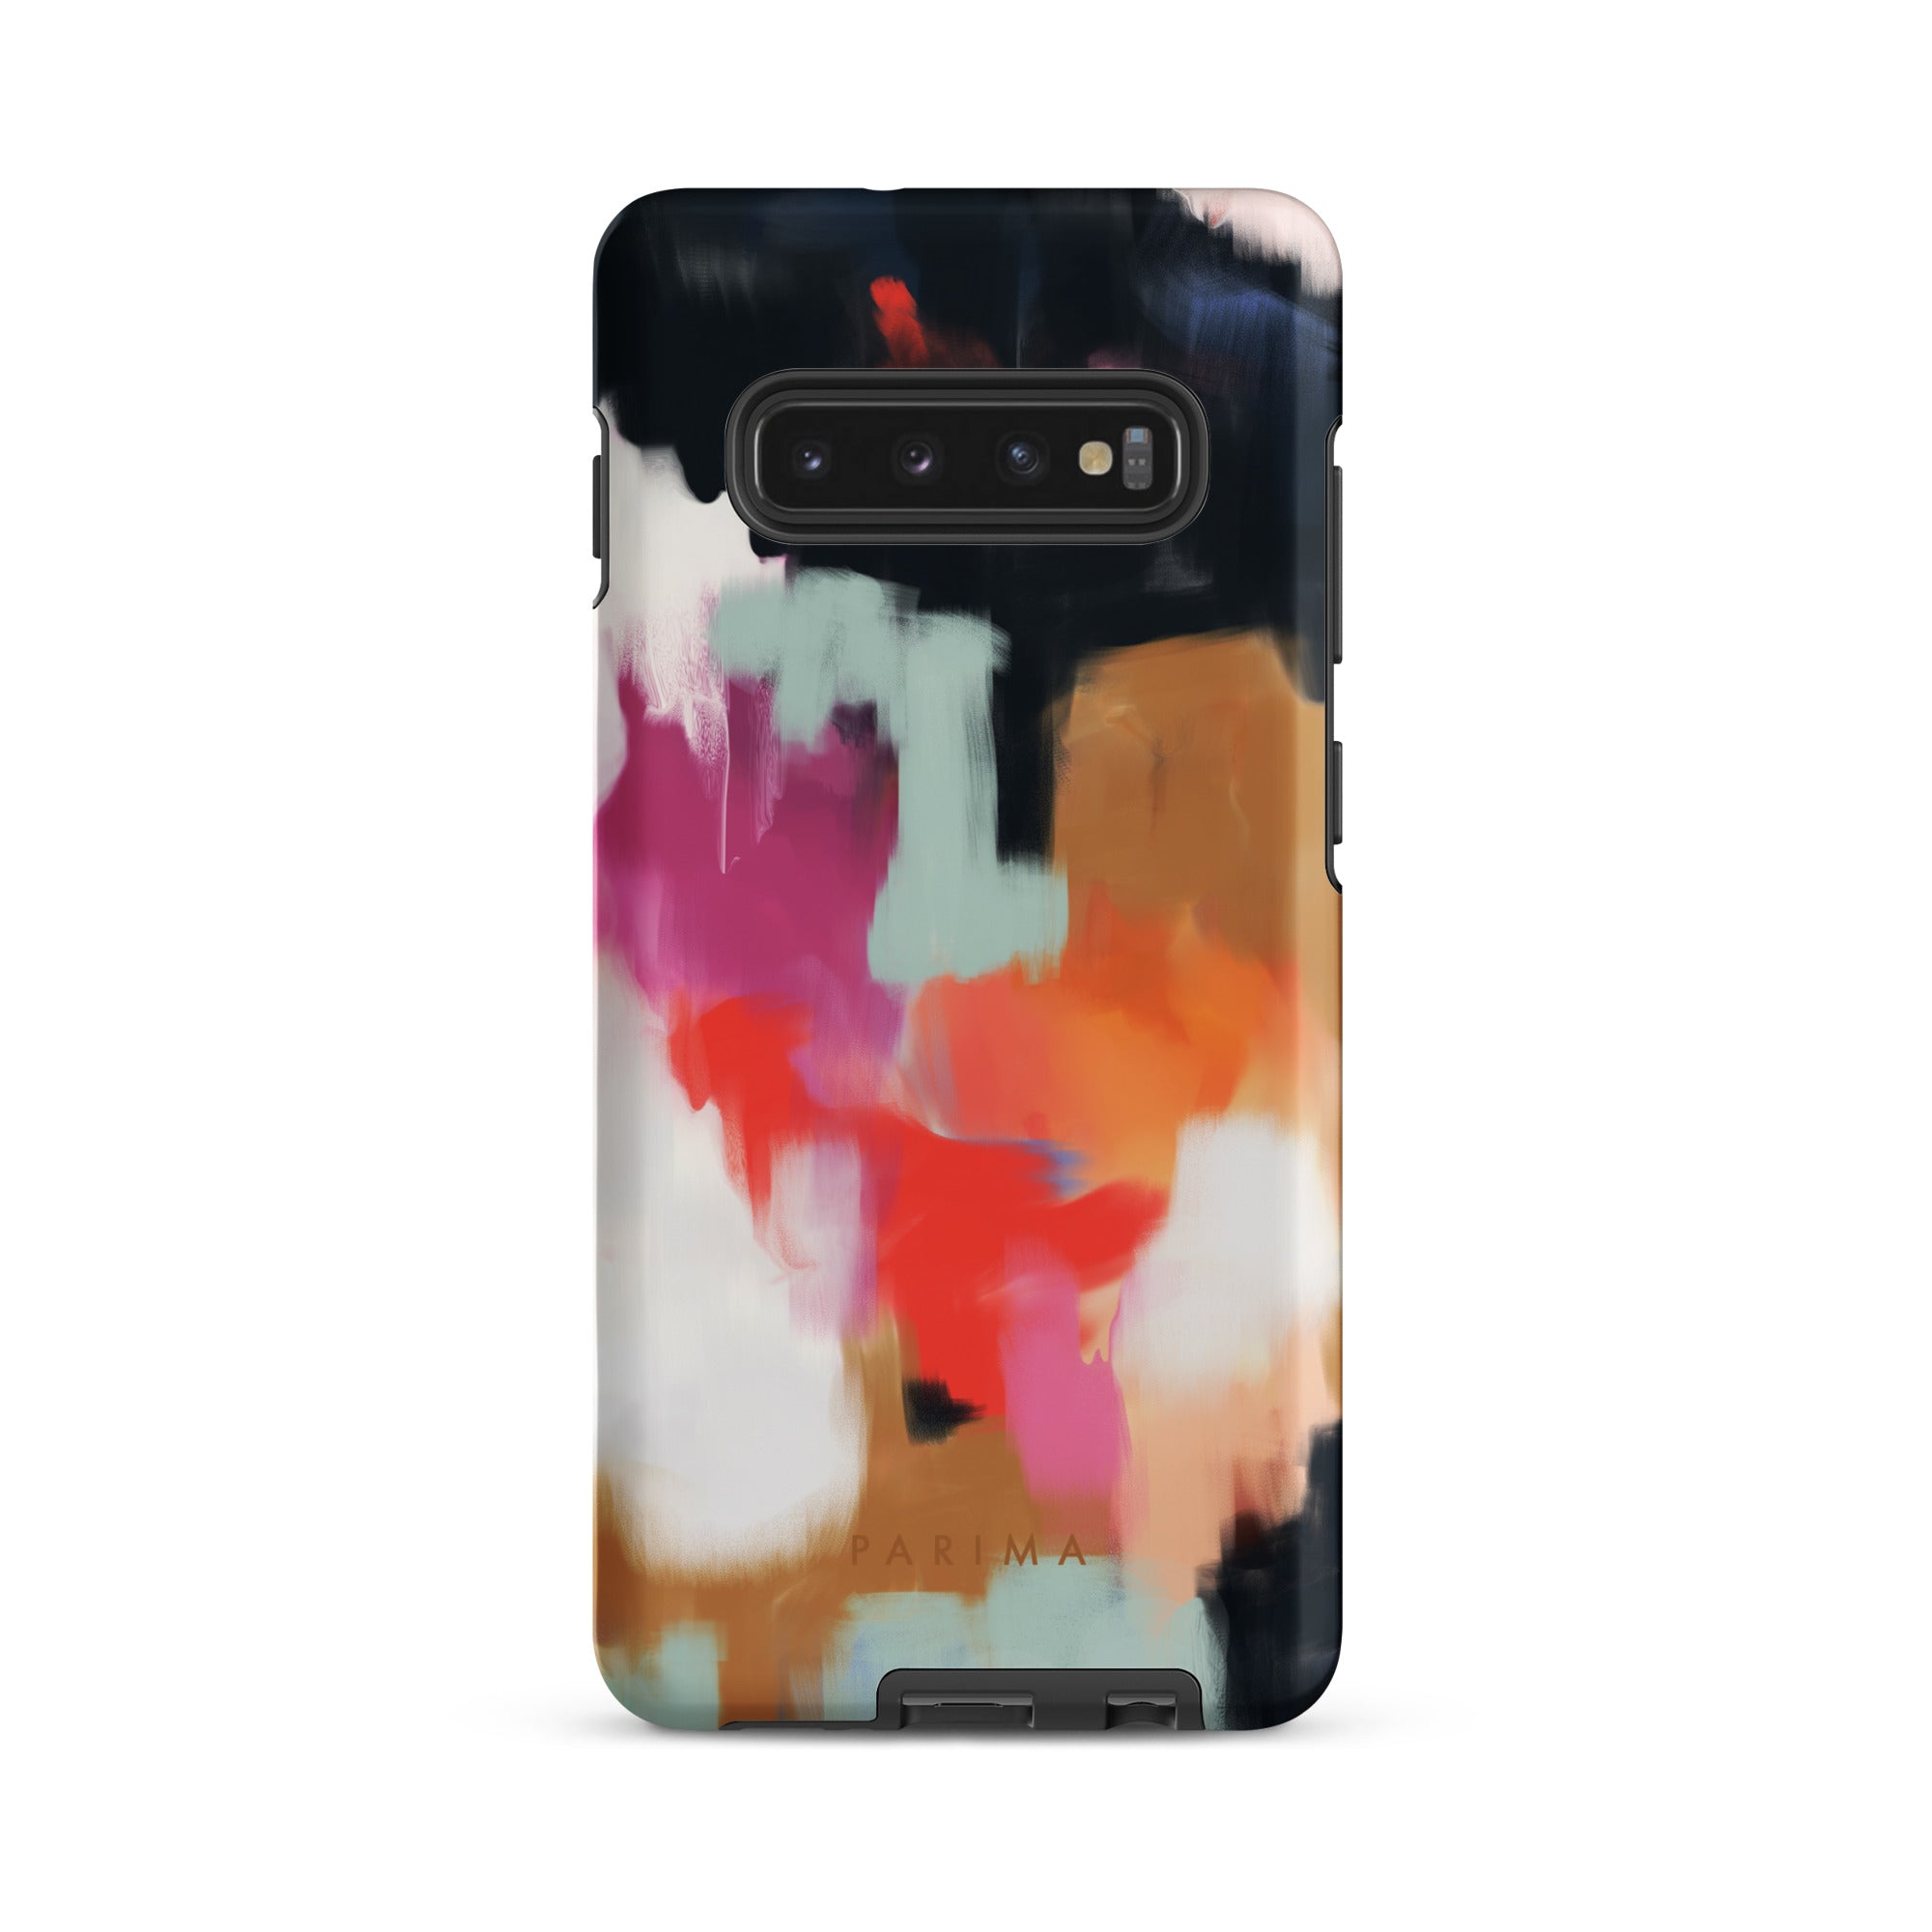 Ruthie, blue and pink abstract art on Samsung Galaxy S10 Plus tough case by Parima Studio